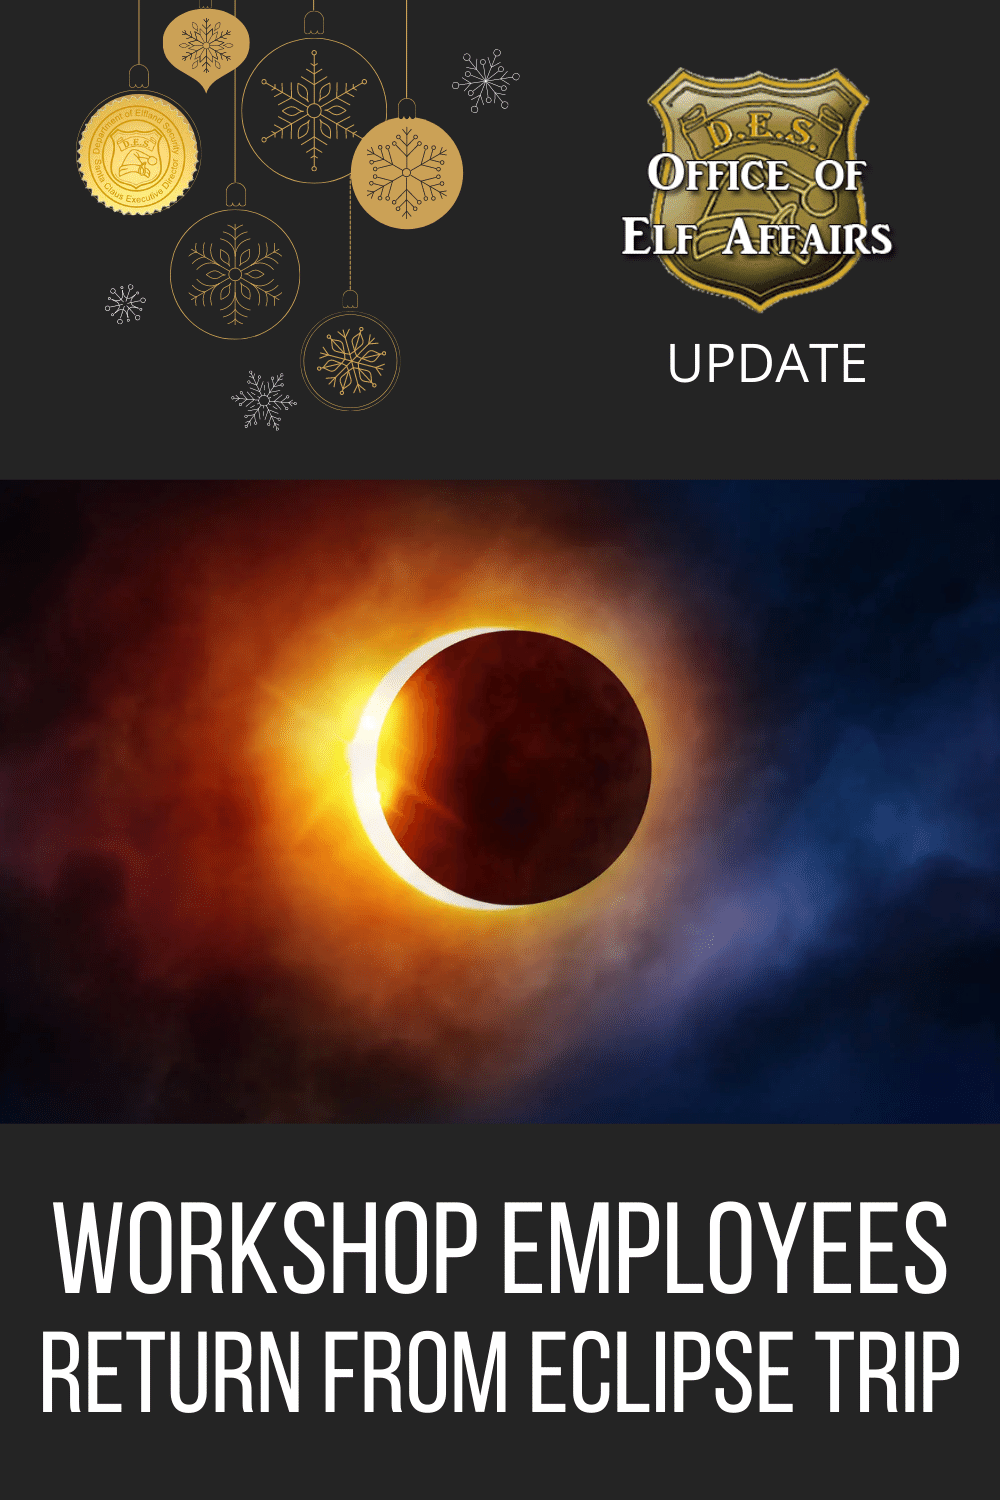 Workshop Employees Returning Today from Eclipse Trip